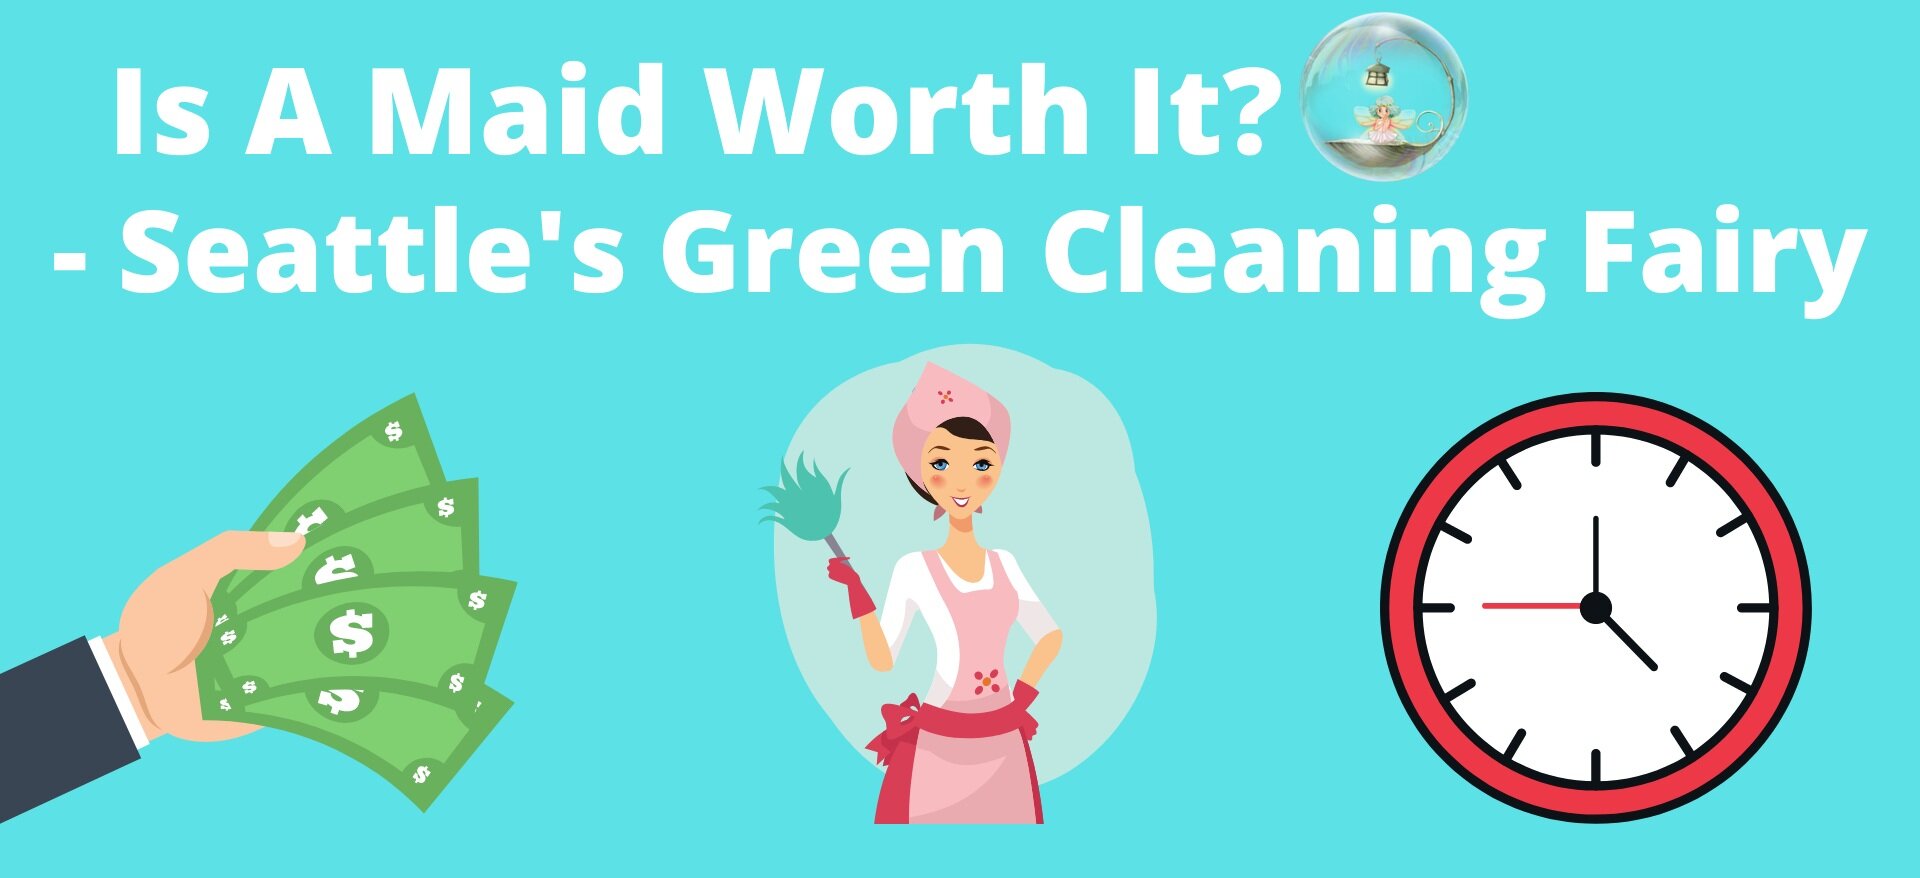 Is A Maid Worth The Money Or Should I Clean Myself?